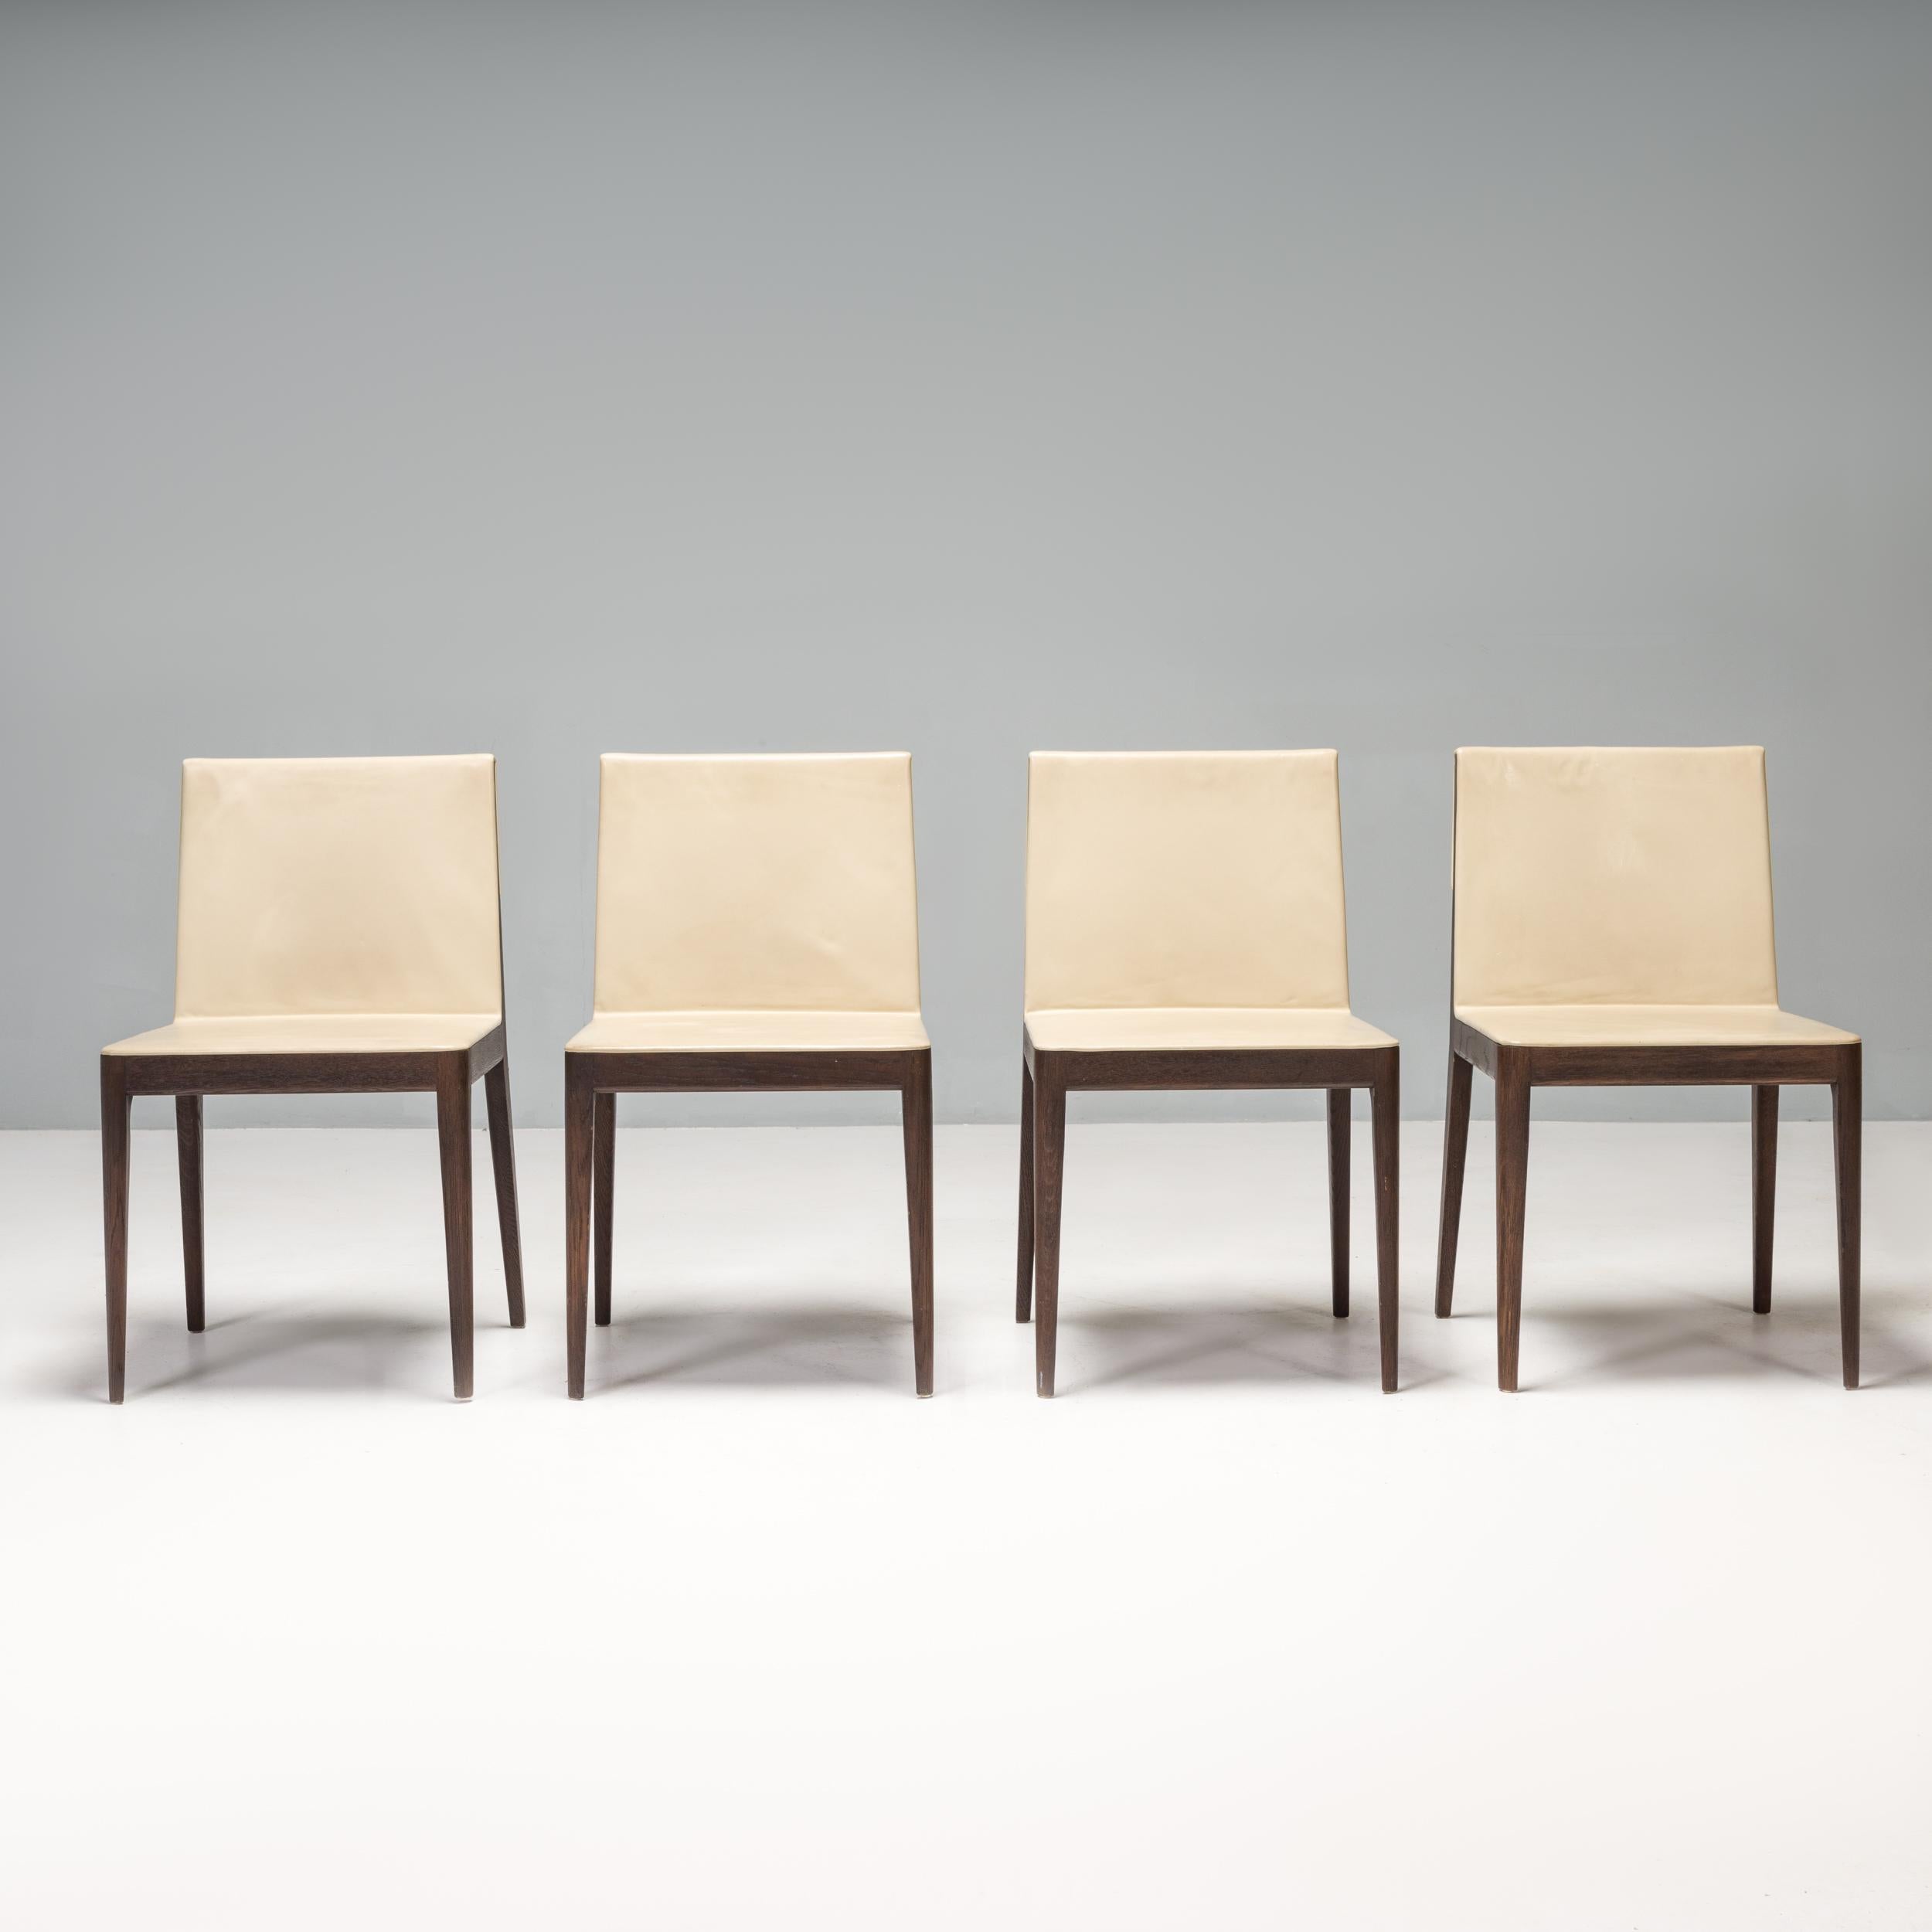 Originally designed by Antonio Citterio in 2009 for B&B Italia, the EL dining chair is a sleek and sophisticated piece of design.

Featuring a pared-back silhouette, the chairs have a solid smoked stained oak frame with a cross bar detail across